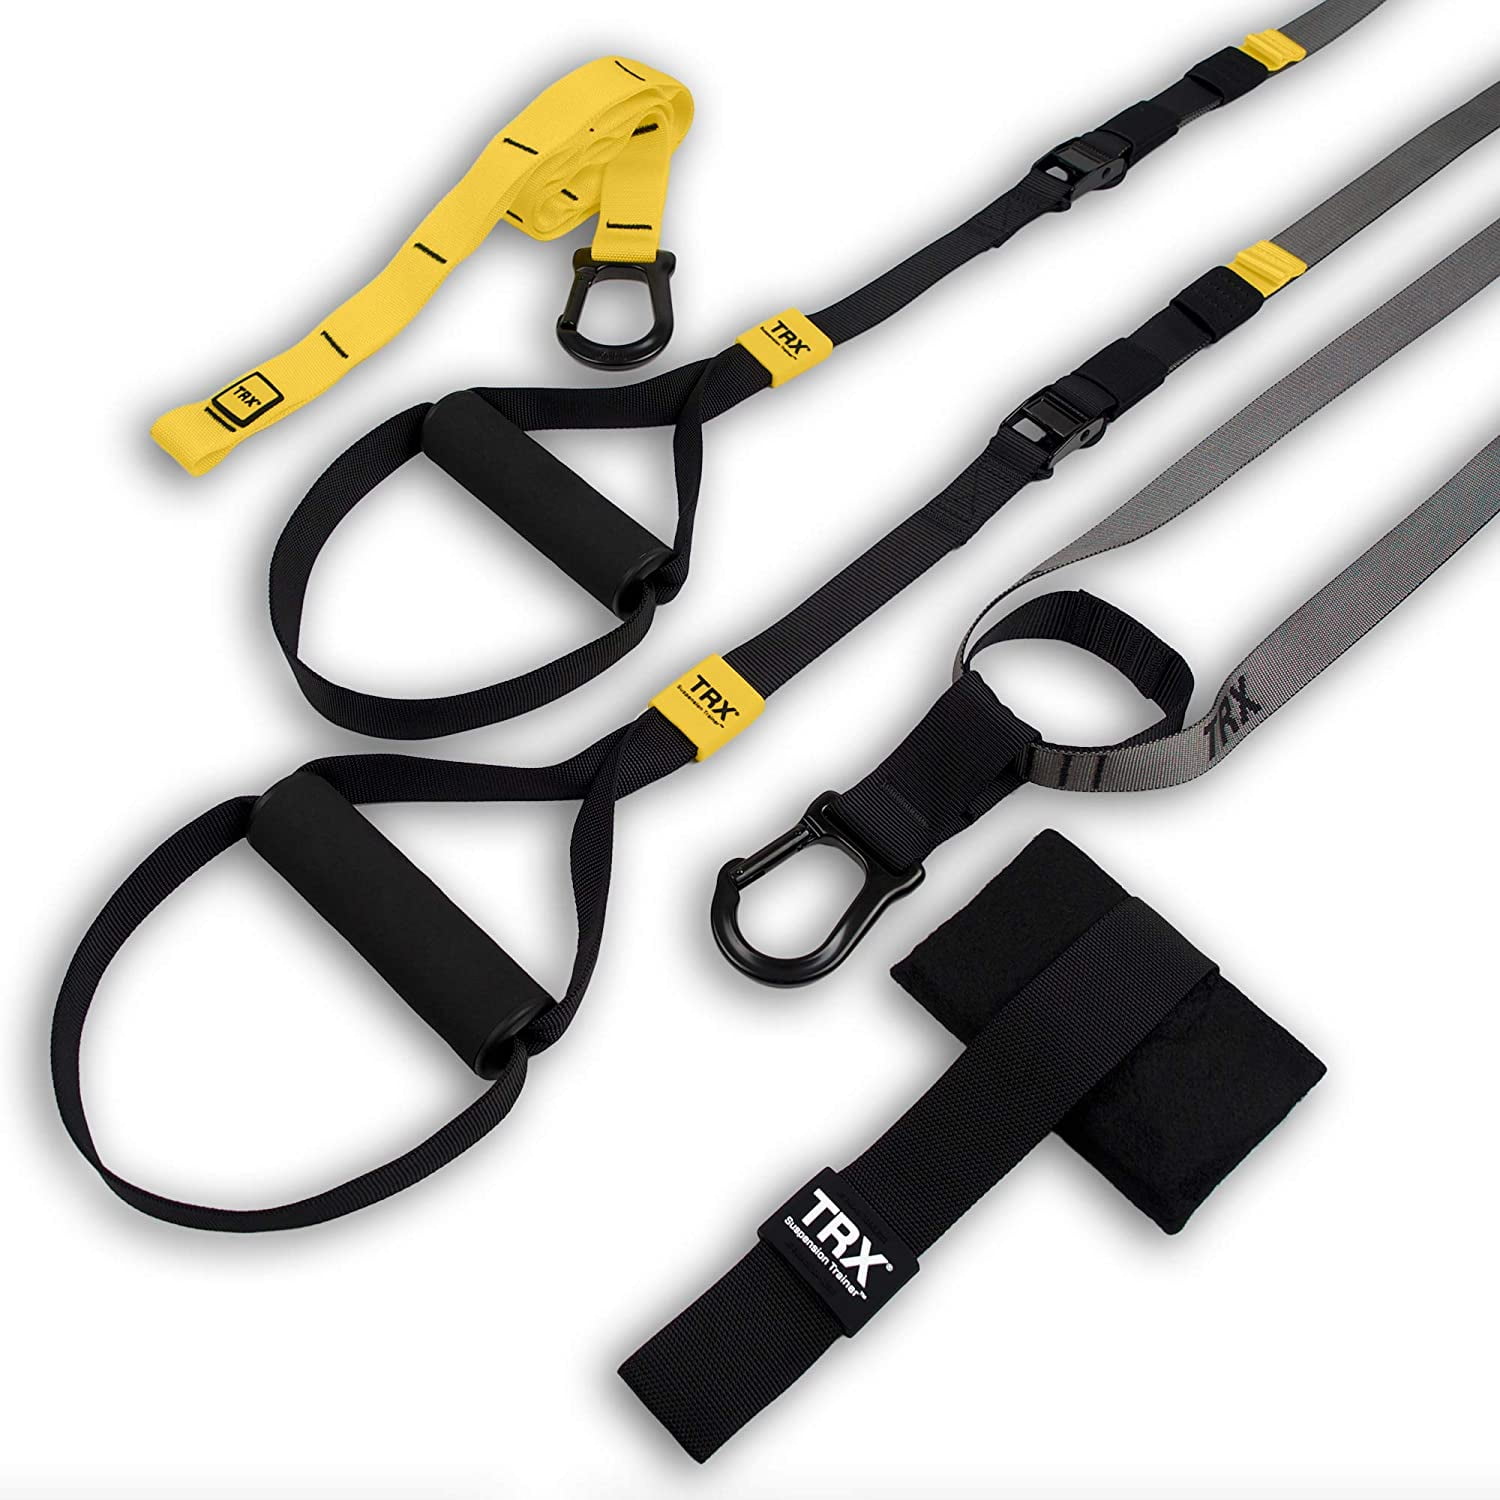 TRX Training Training Mat Anywhere Fit Your Workout in Anytime 